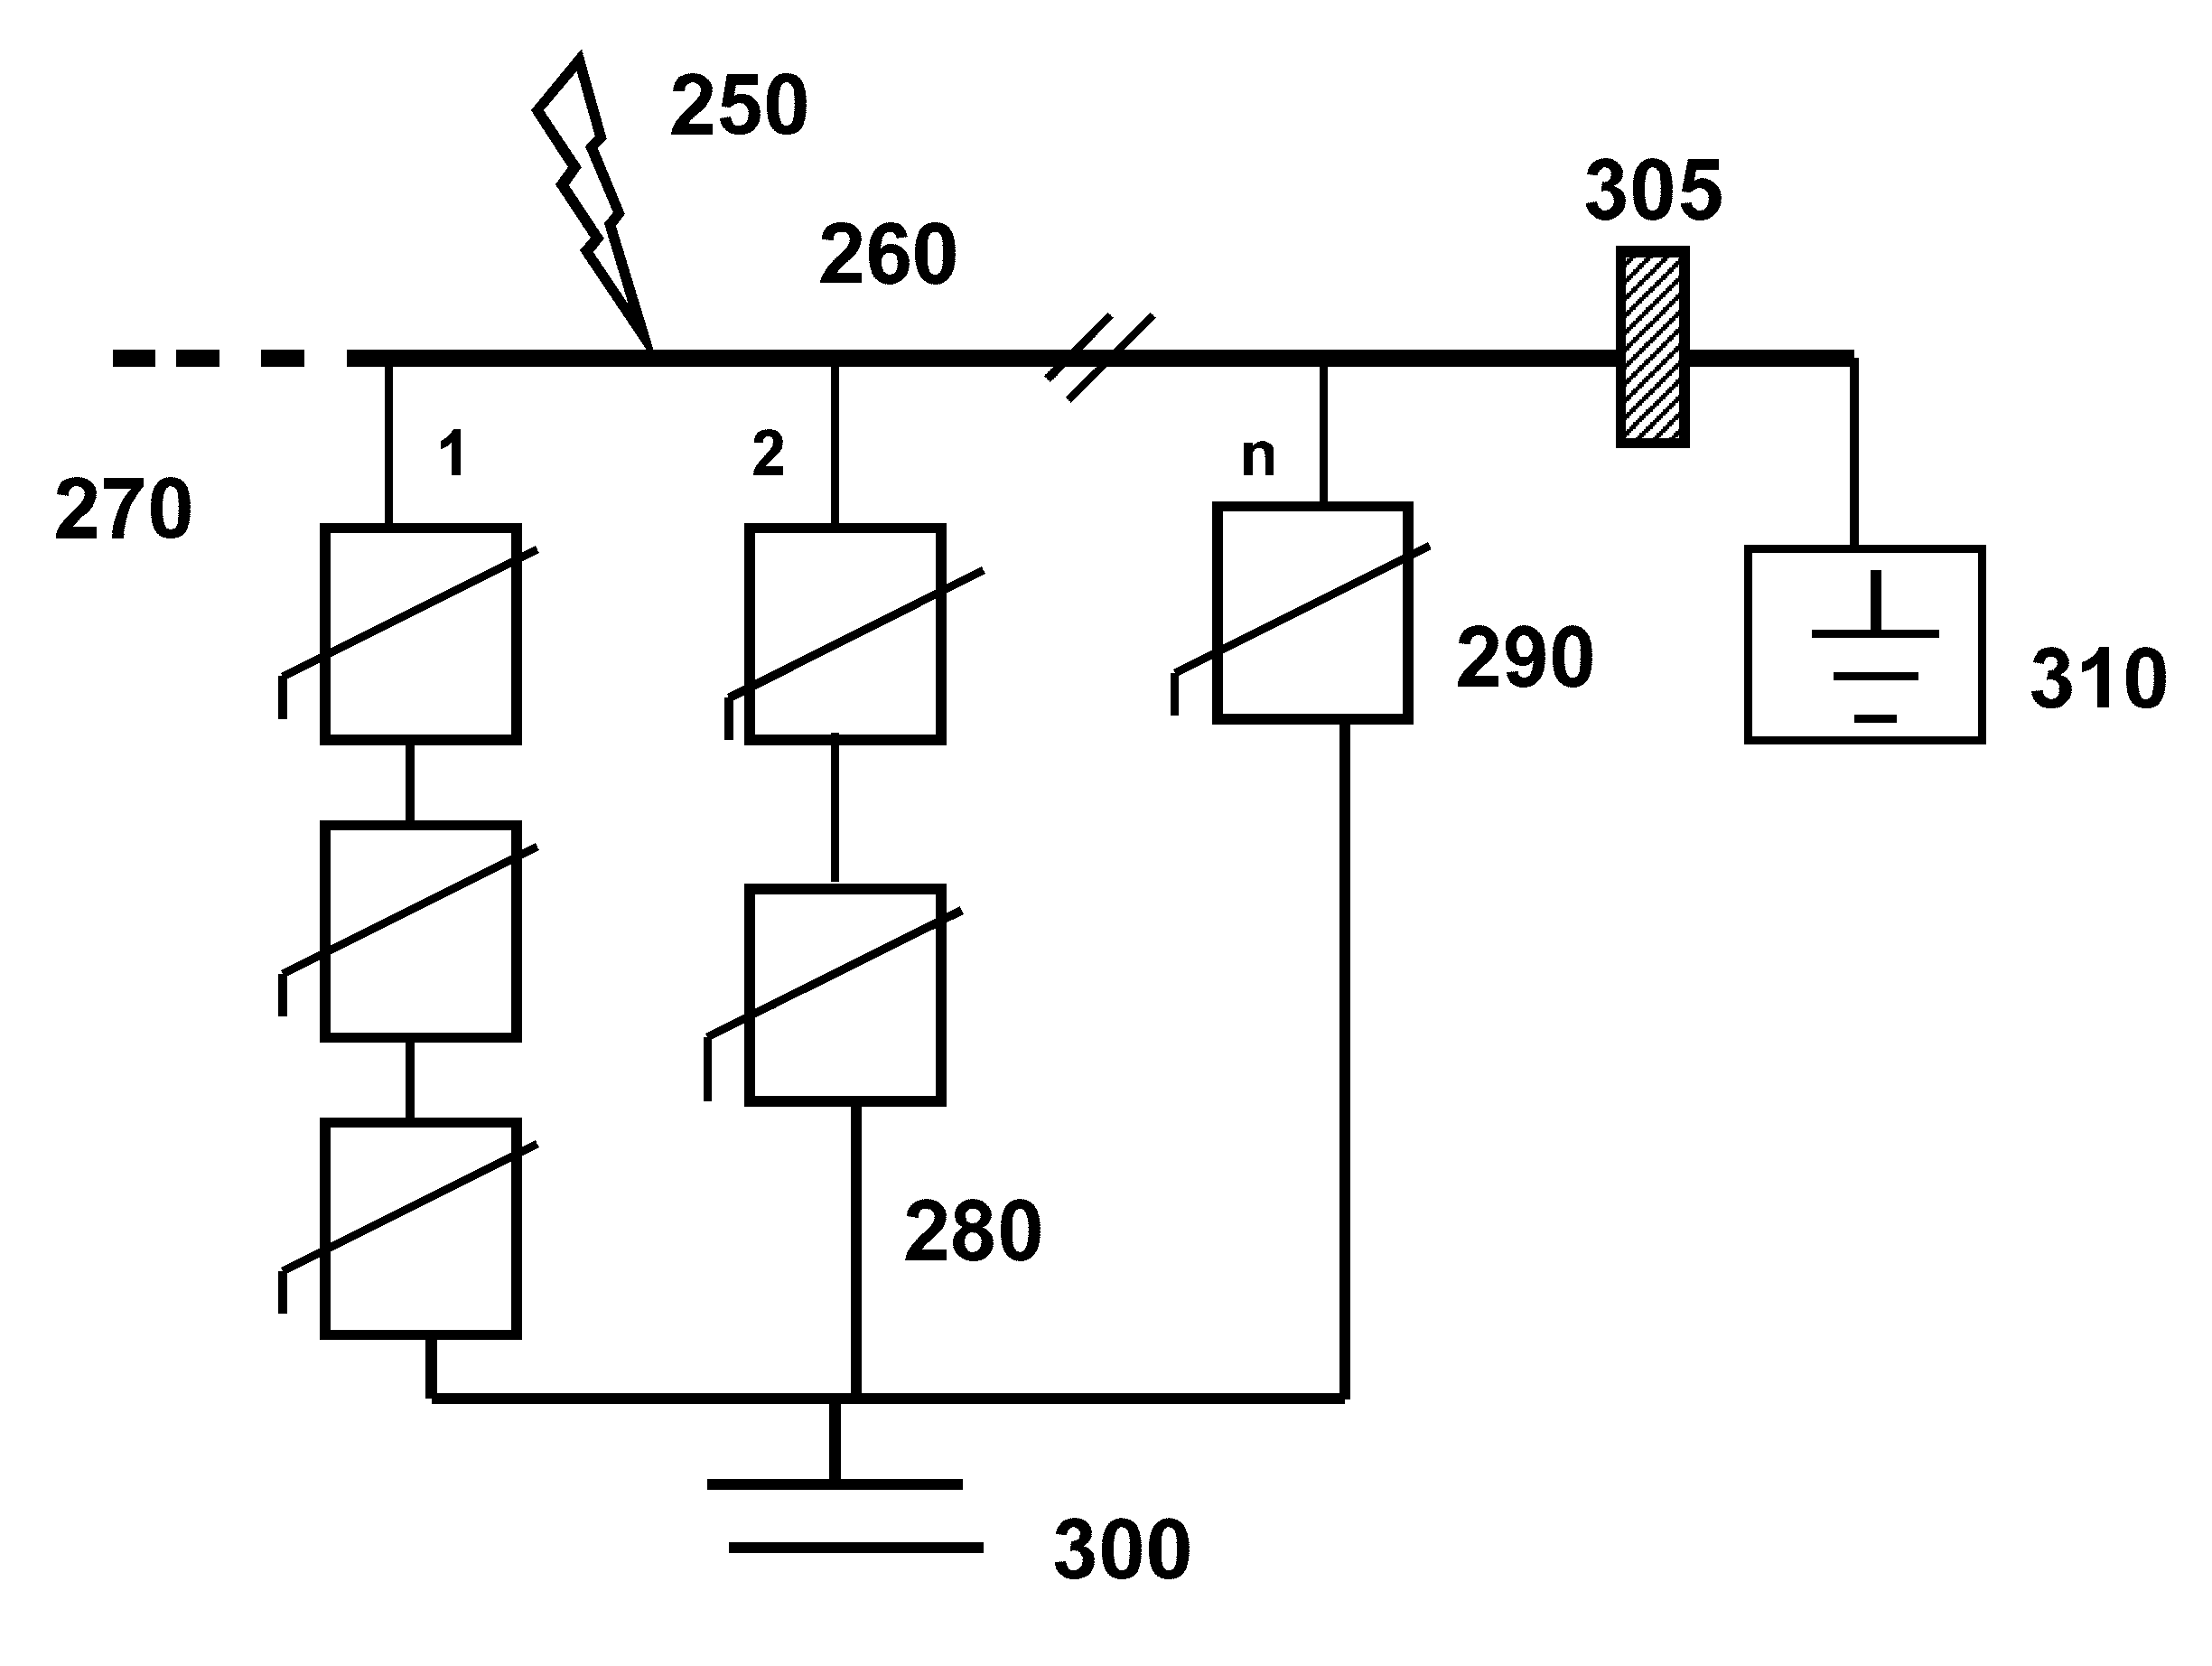 Method of atmospheric discharge energy conversion, storage and distribution